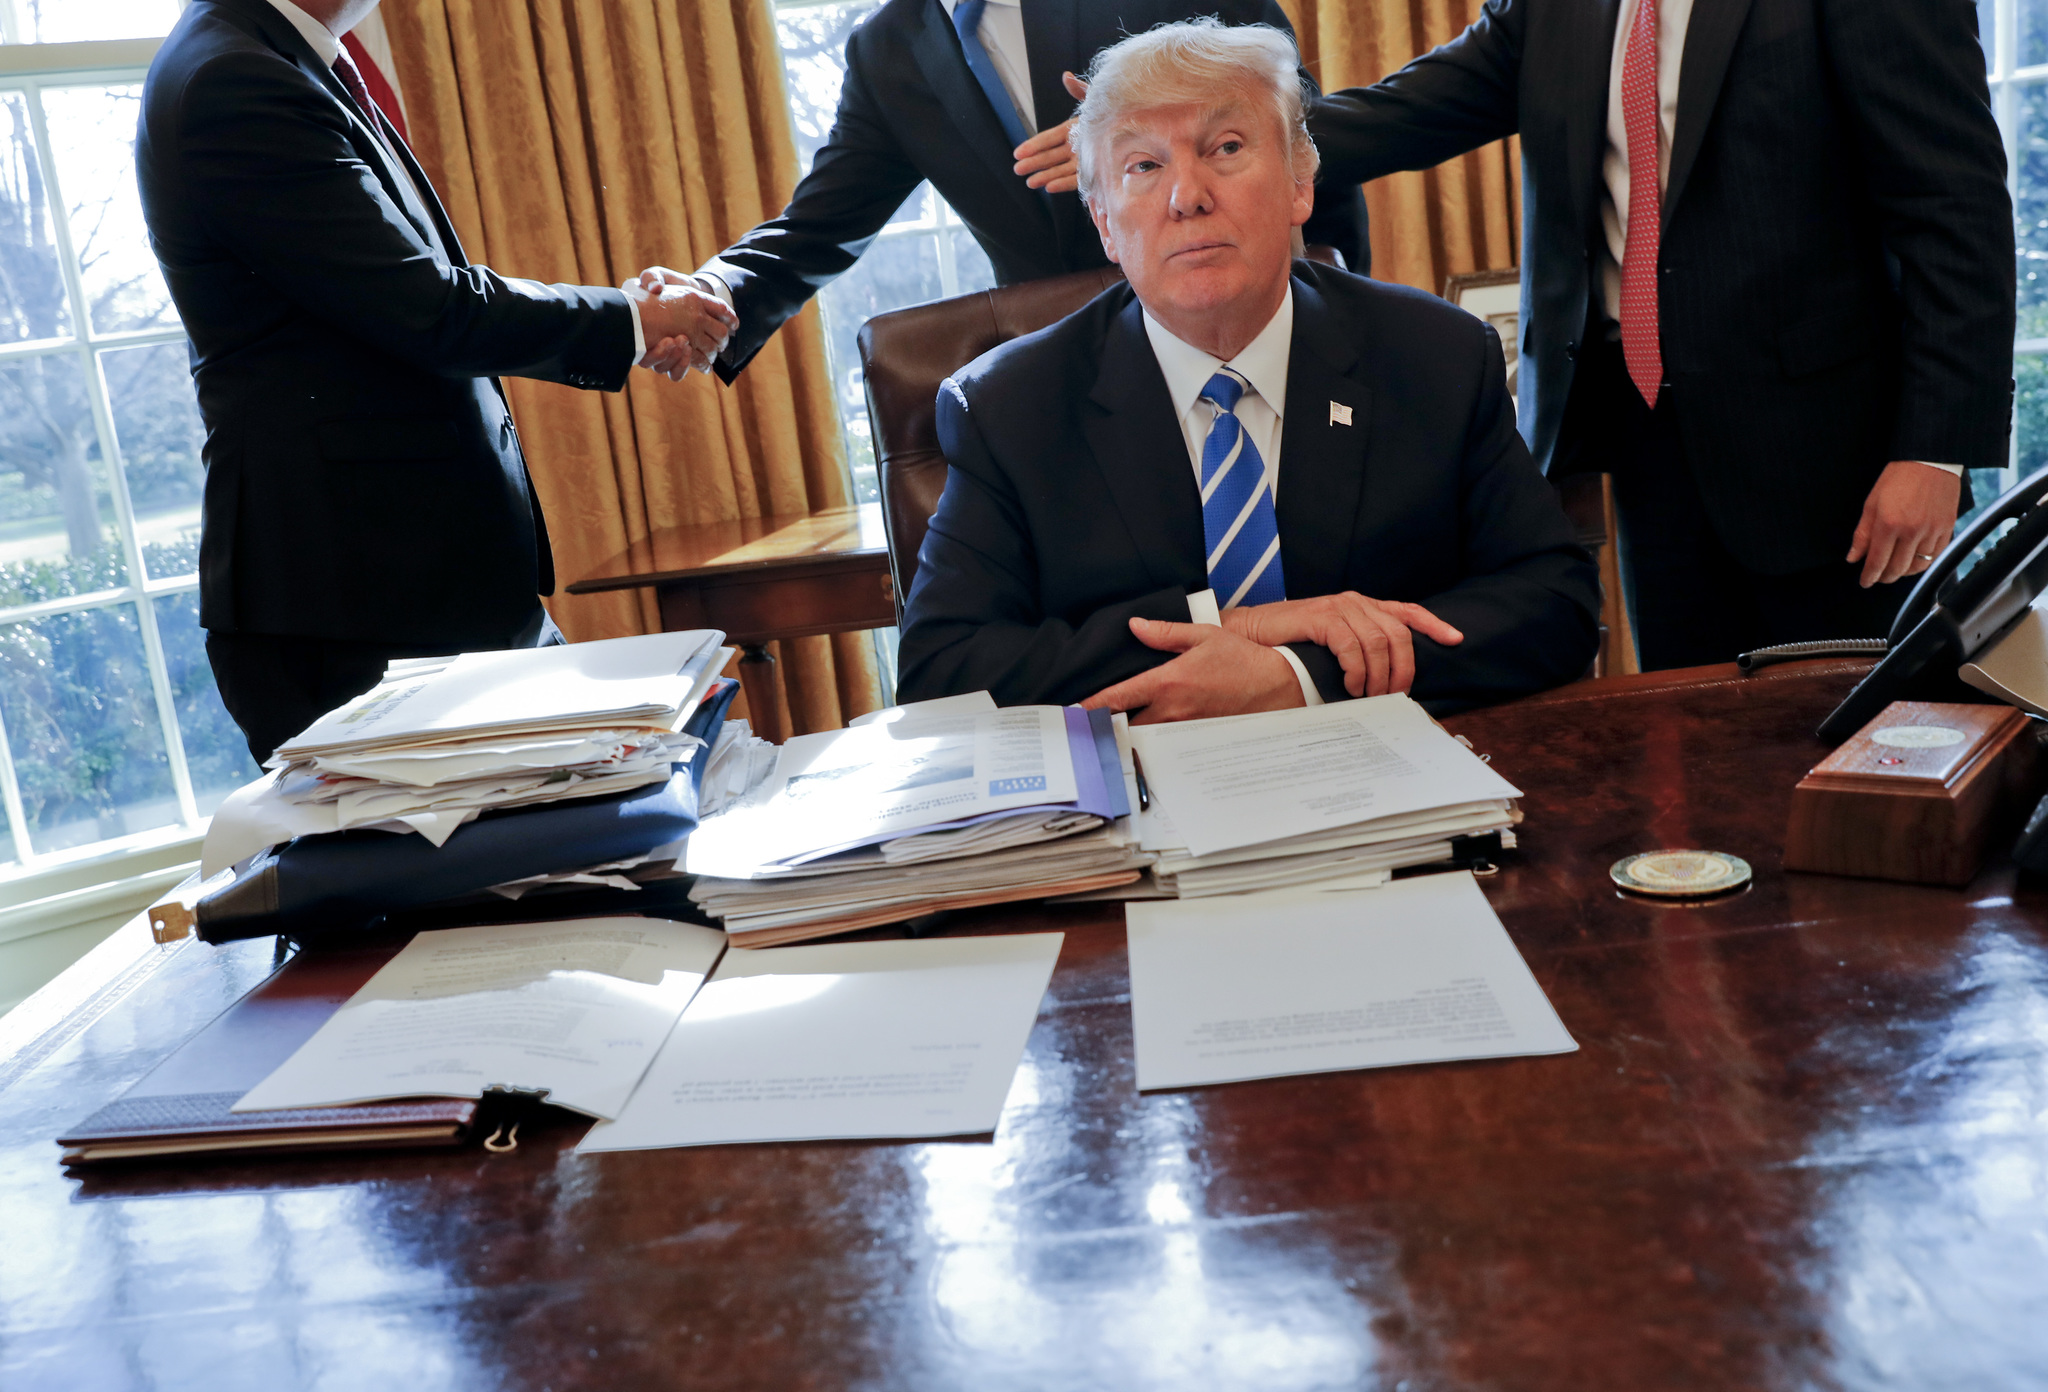 President Donald Trump sits at his desk after a meeting with Intel CEO Brian Krzanich, left, and members of his staff in the Oval Office of the White House in Washington on Wednesday. (Pablo Martinez Monsivais | The Associated Press)